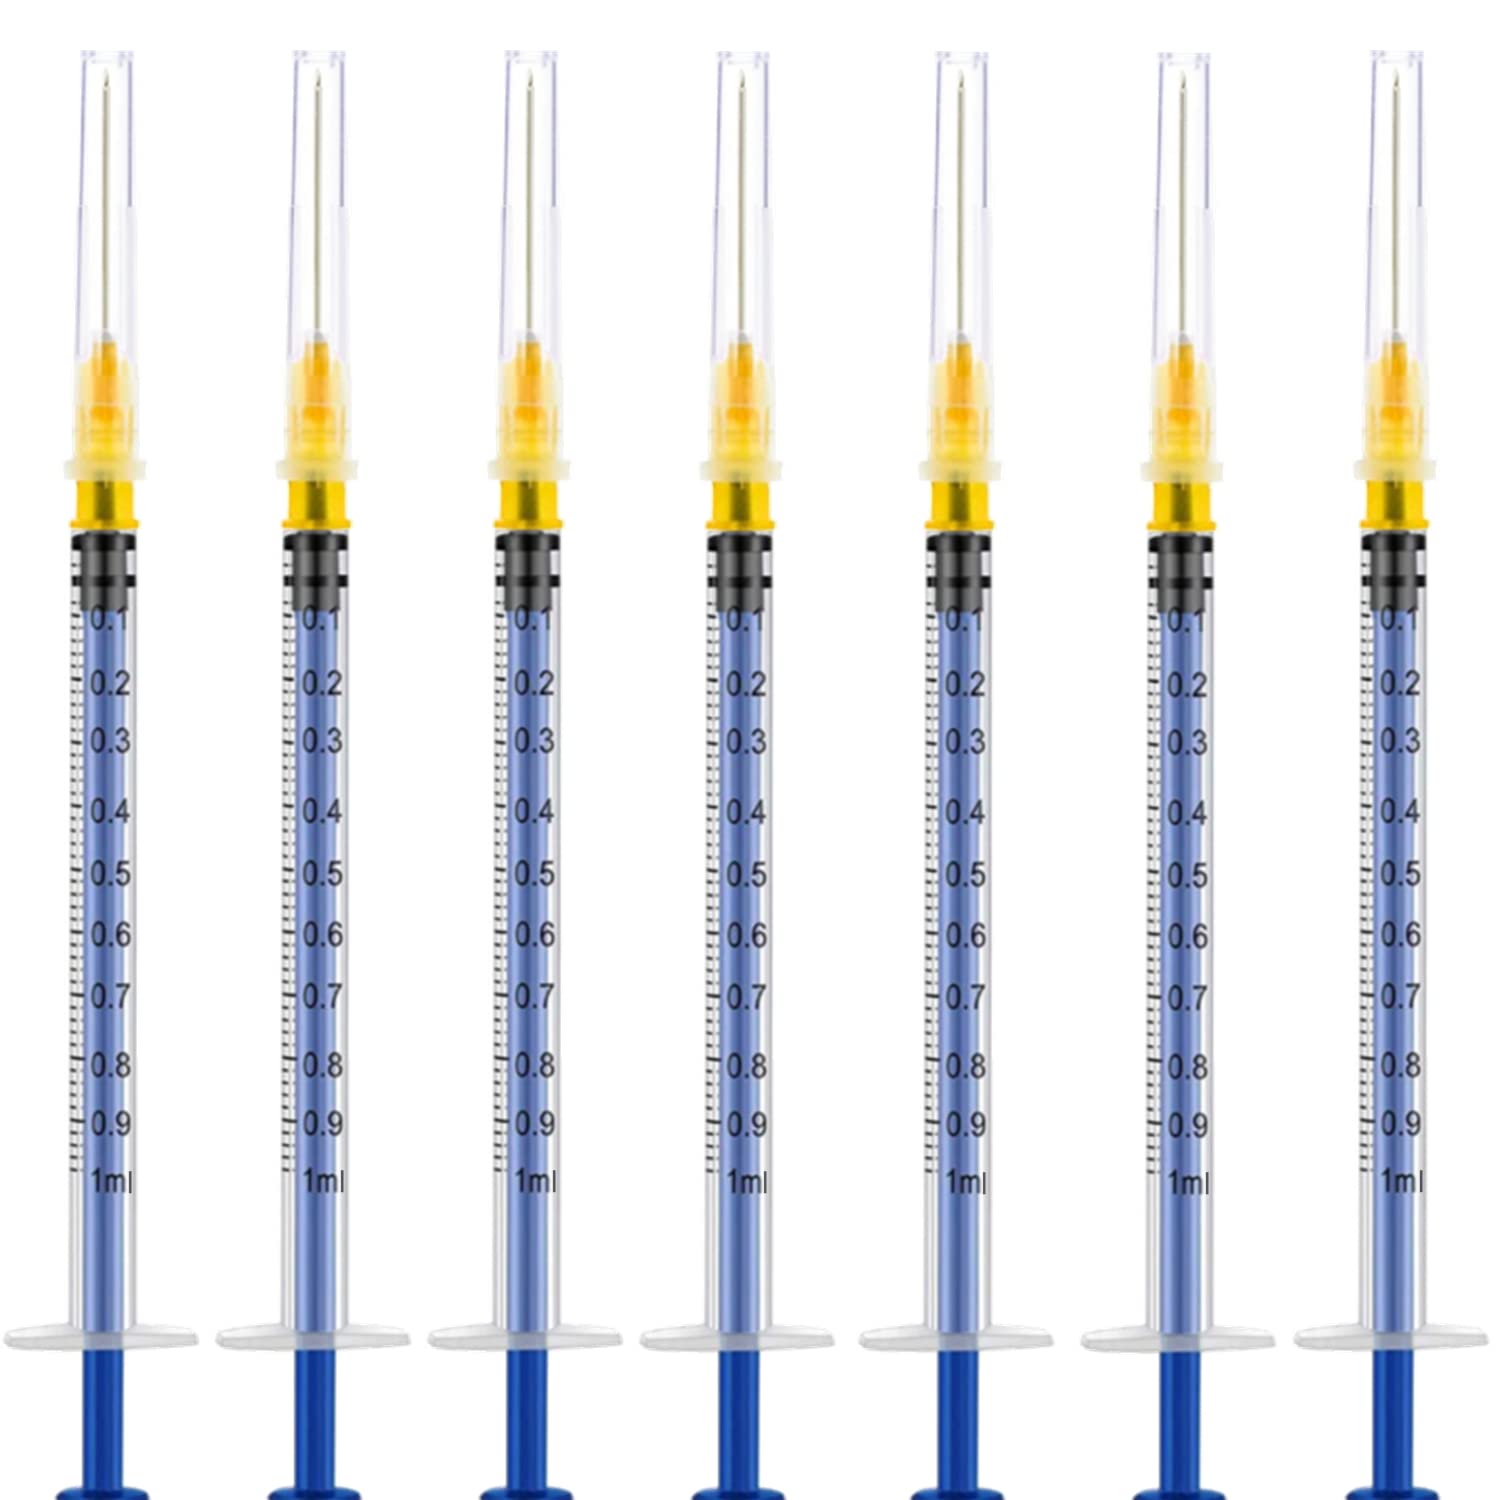 15 Pack 1ml 25Ga Plastic Syringe with Measurement for Scientific Labs and Industrial Dispensing, Disposable Individually Wrapped (15, 1ml 25Ga)